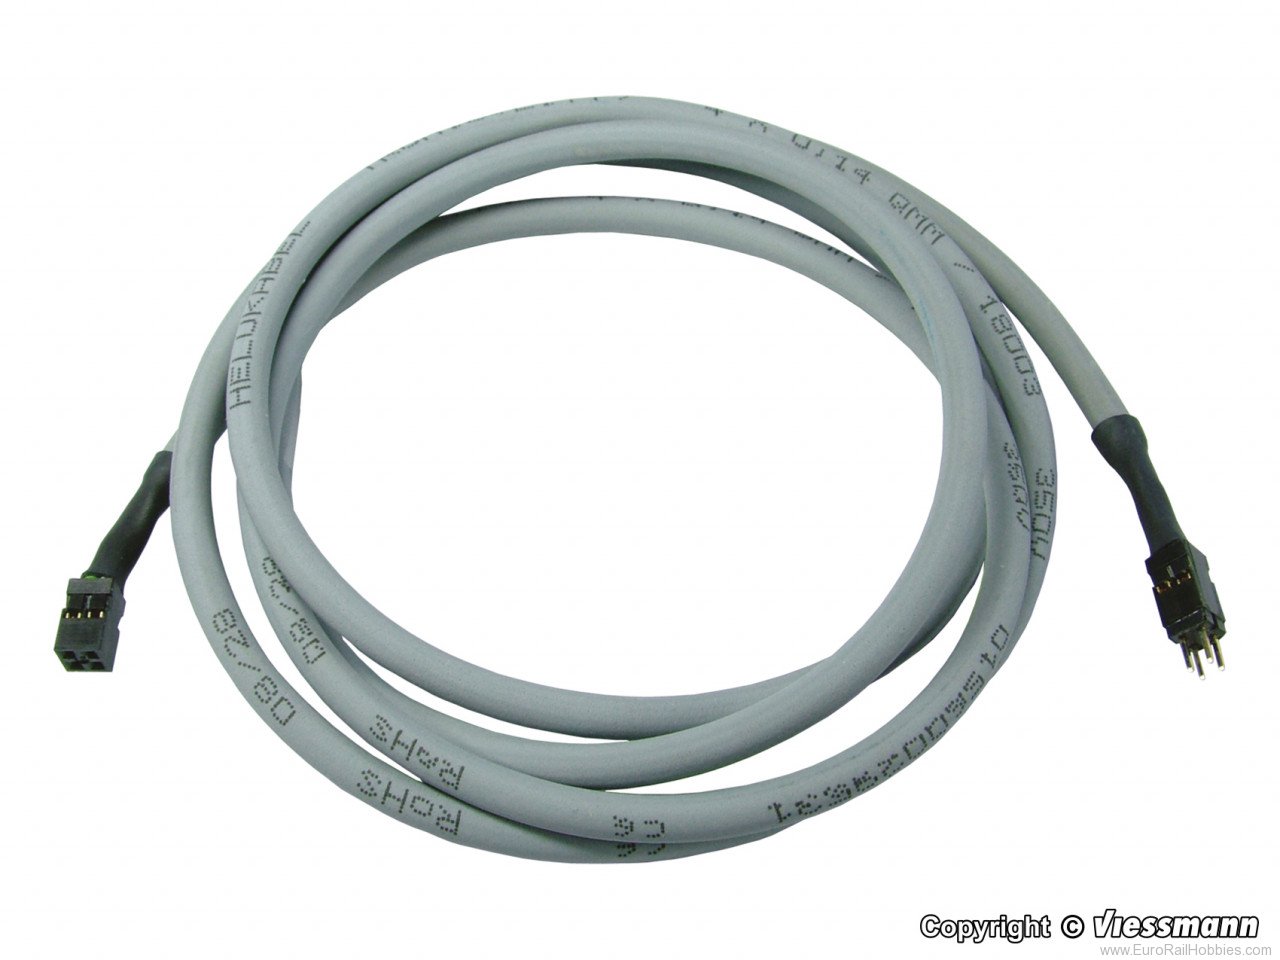 Viessmann 5236 Extension cable for multiplexer 5229; 52292, 